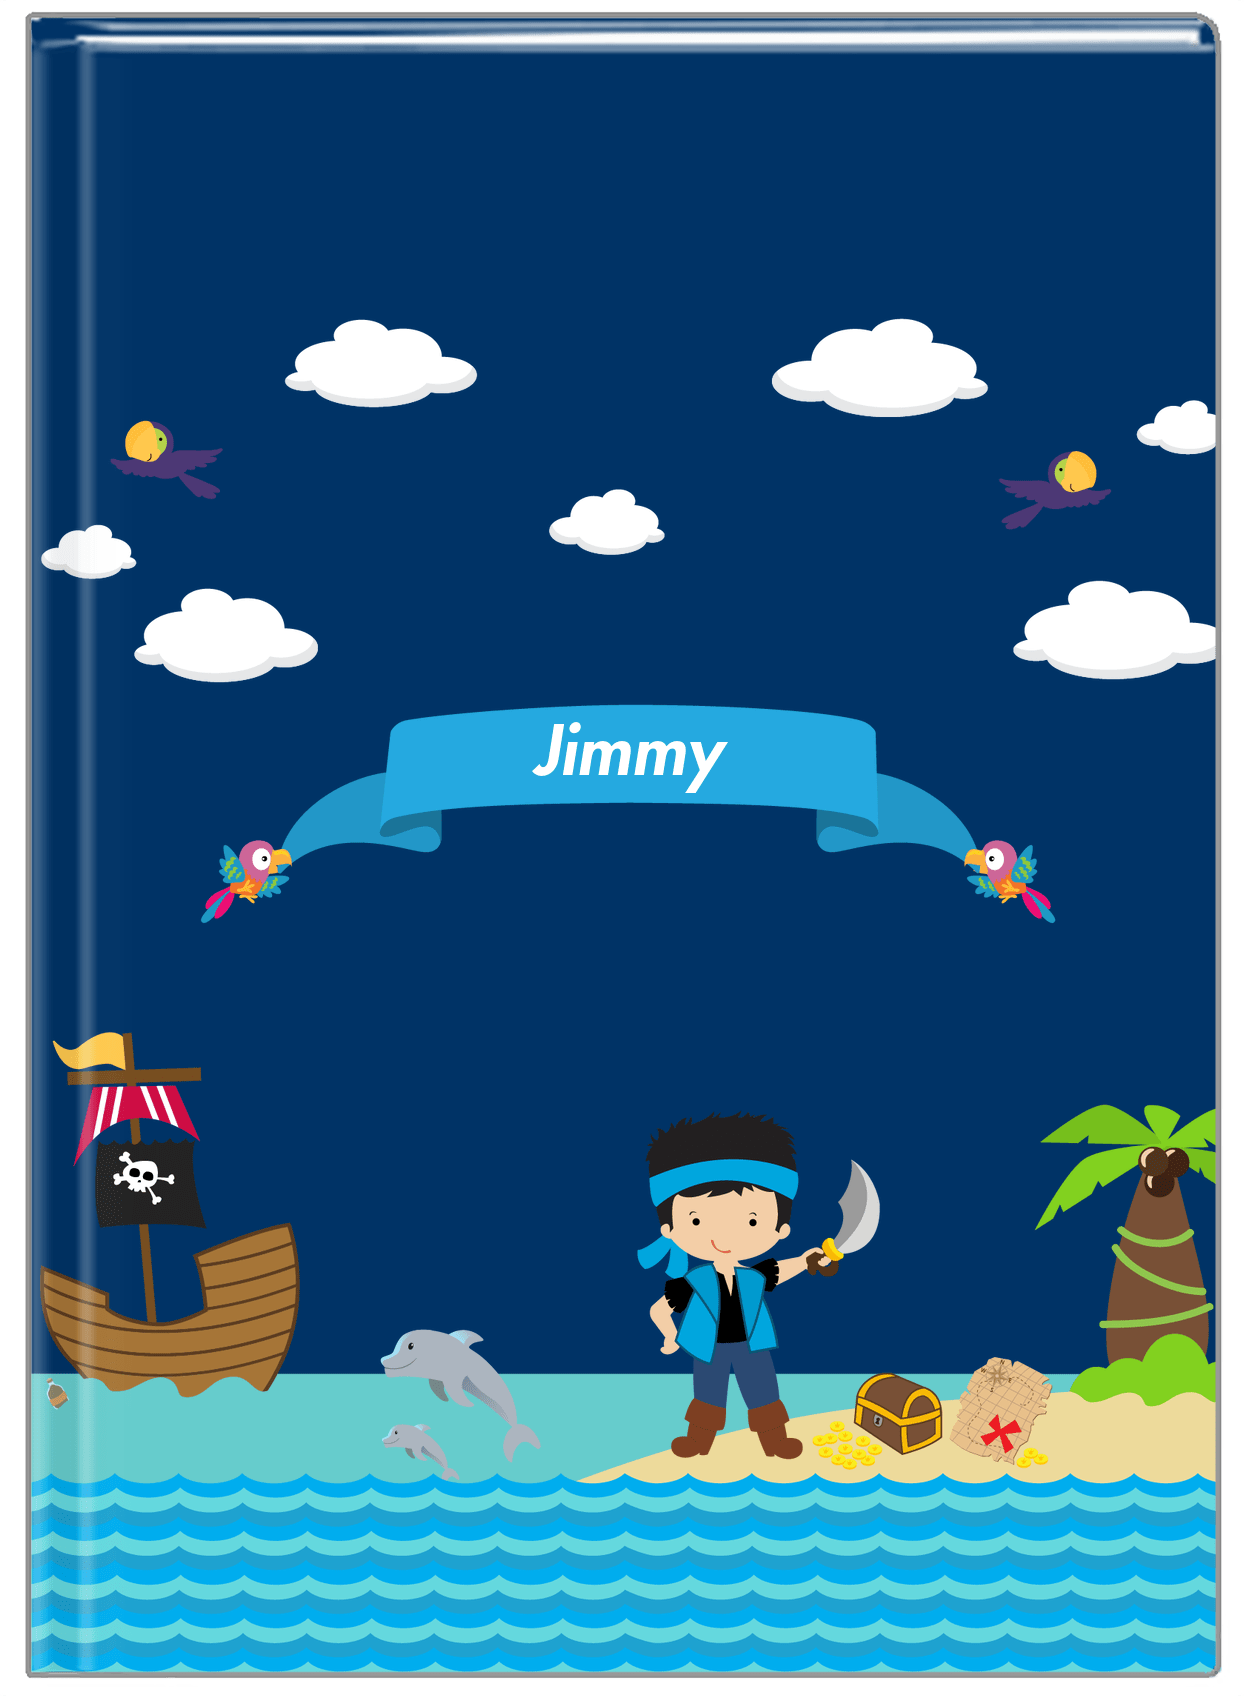 Personalized Pirate Journal IV - Boy Pirate with Sword - Black Hair Boy - Front View